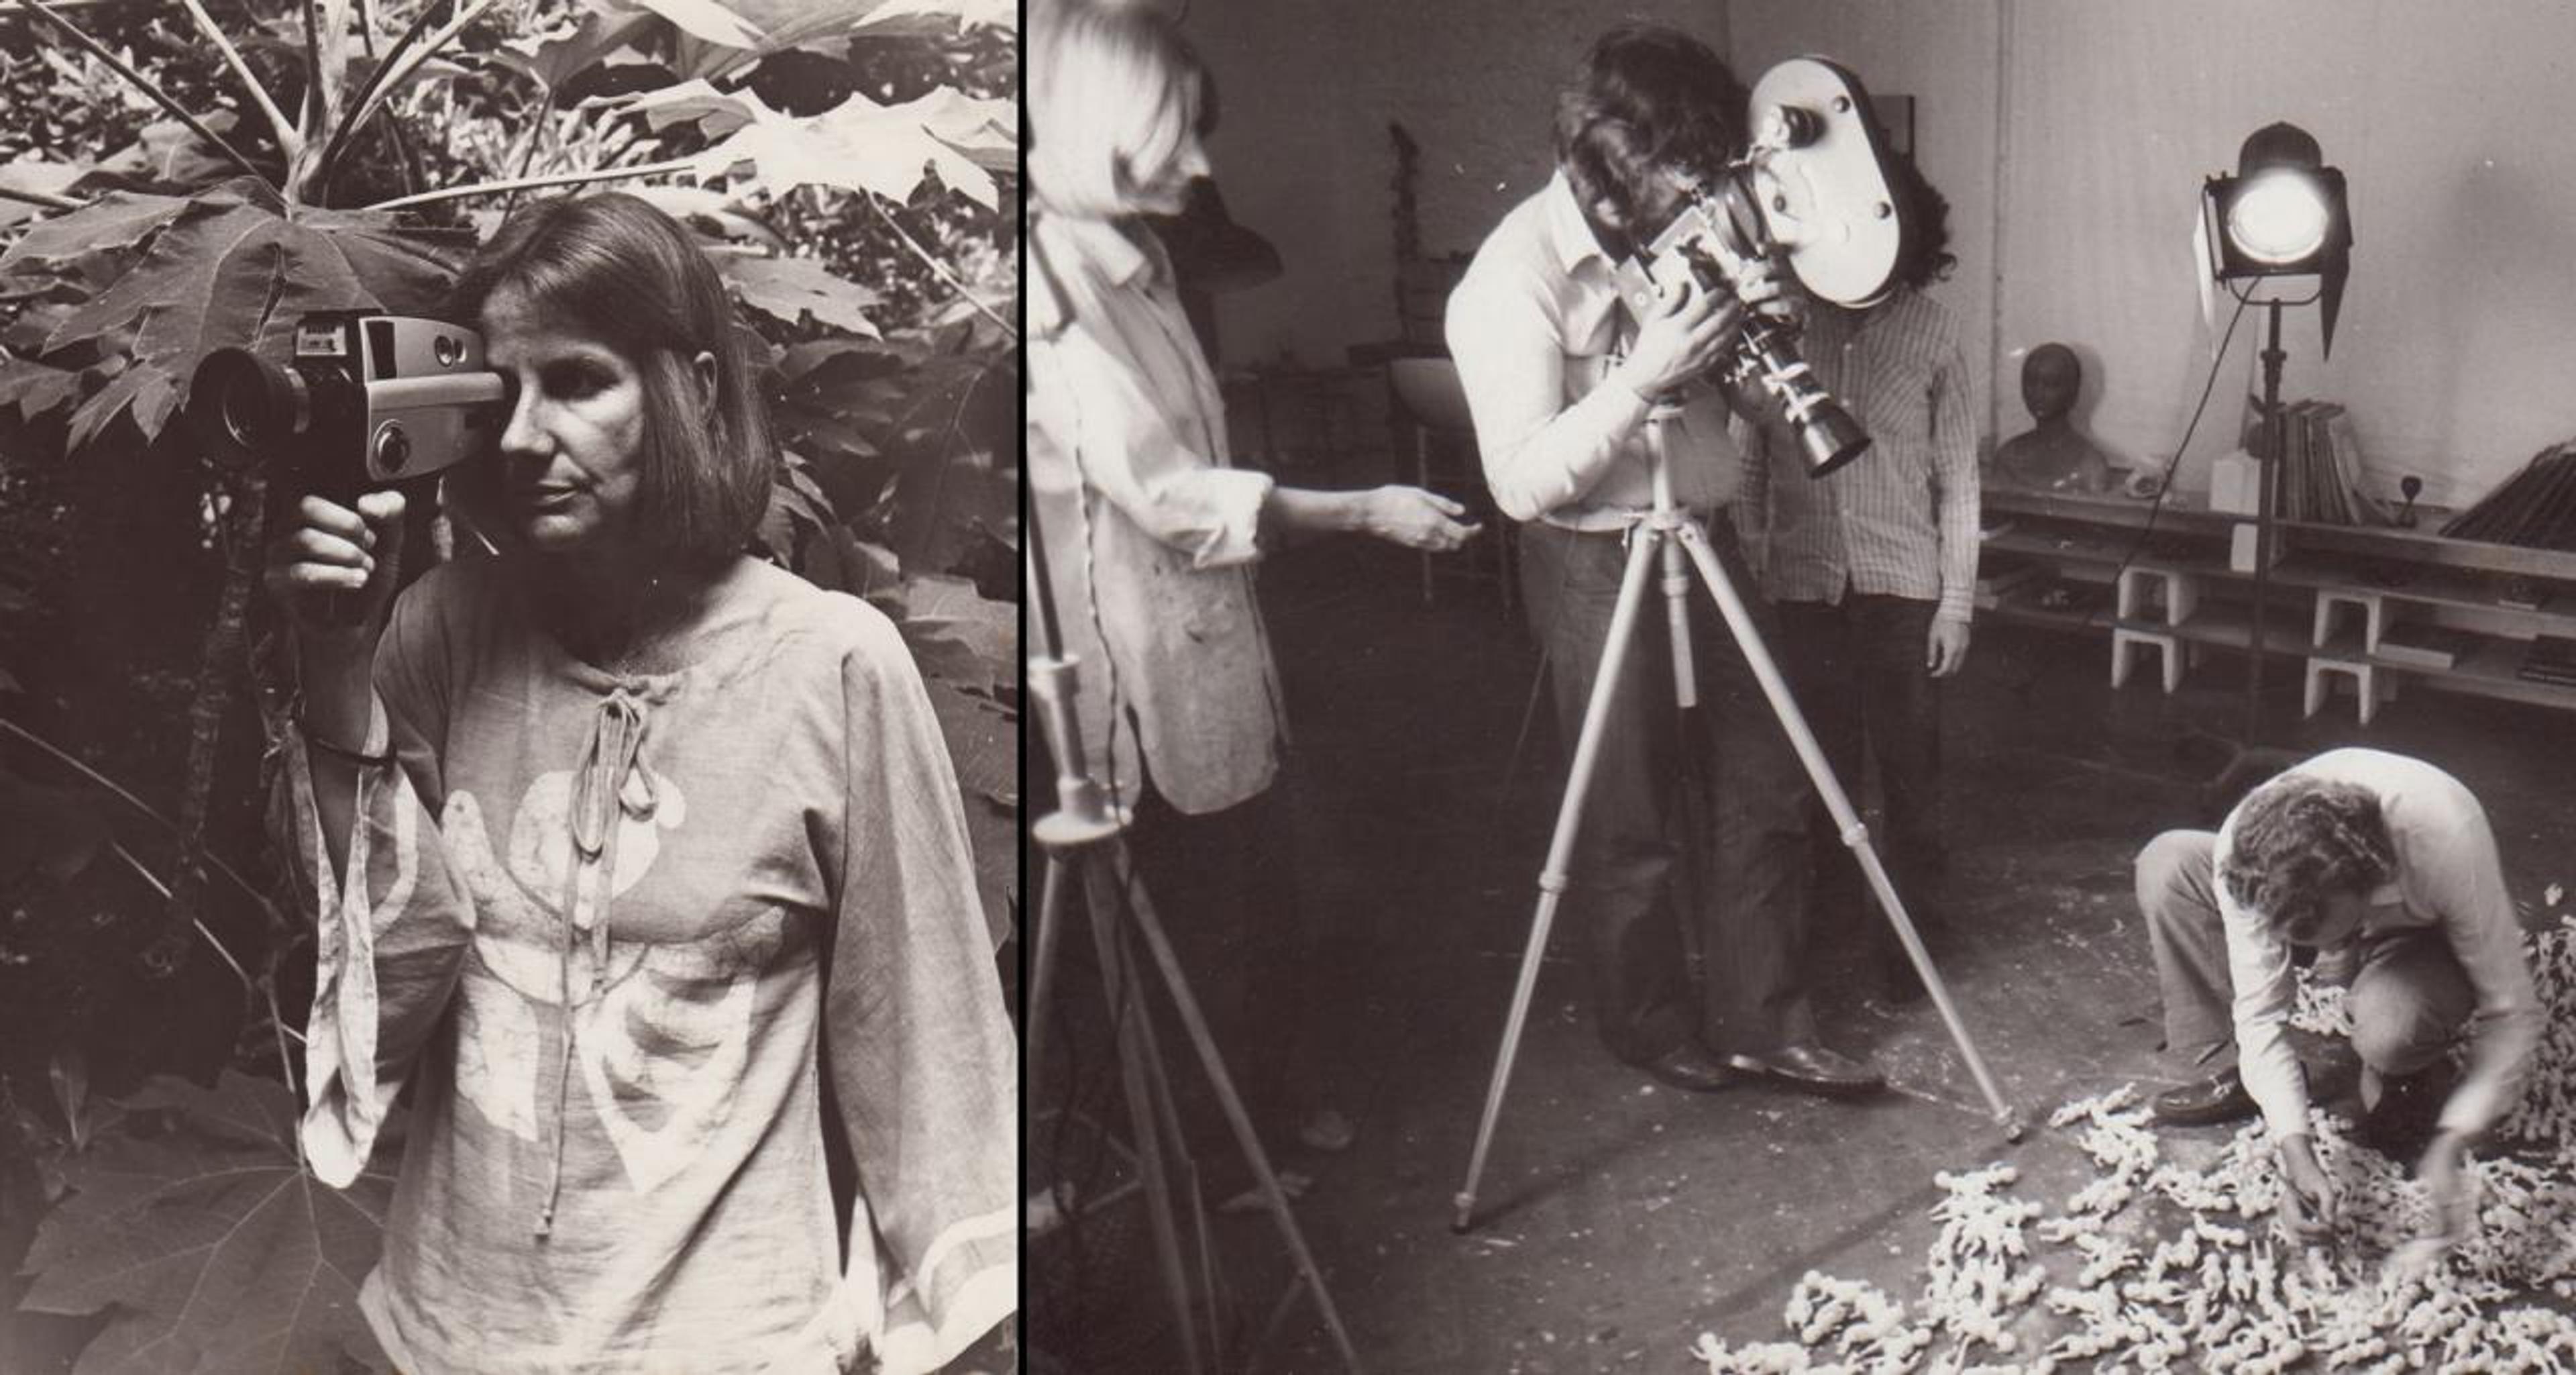 Left: Narcisa Hirsch, Marabunta, film, 1967; right: Narcisa Hirsch and team during the production of Pink Freud, c. 1973